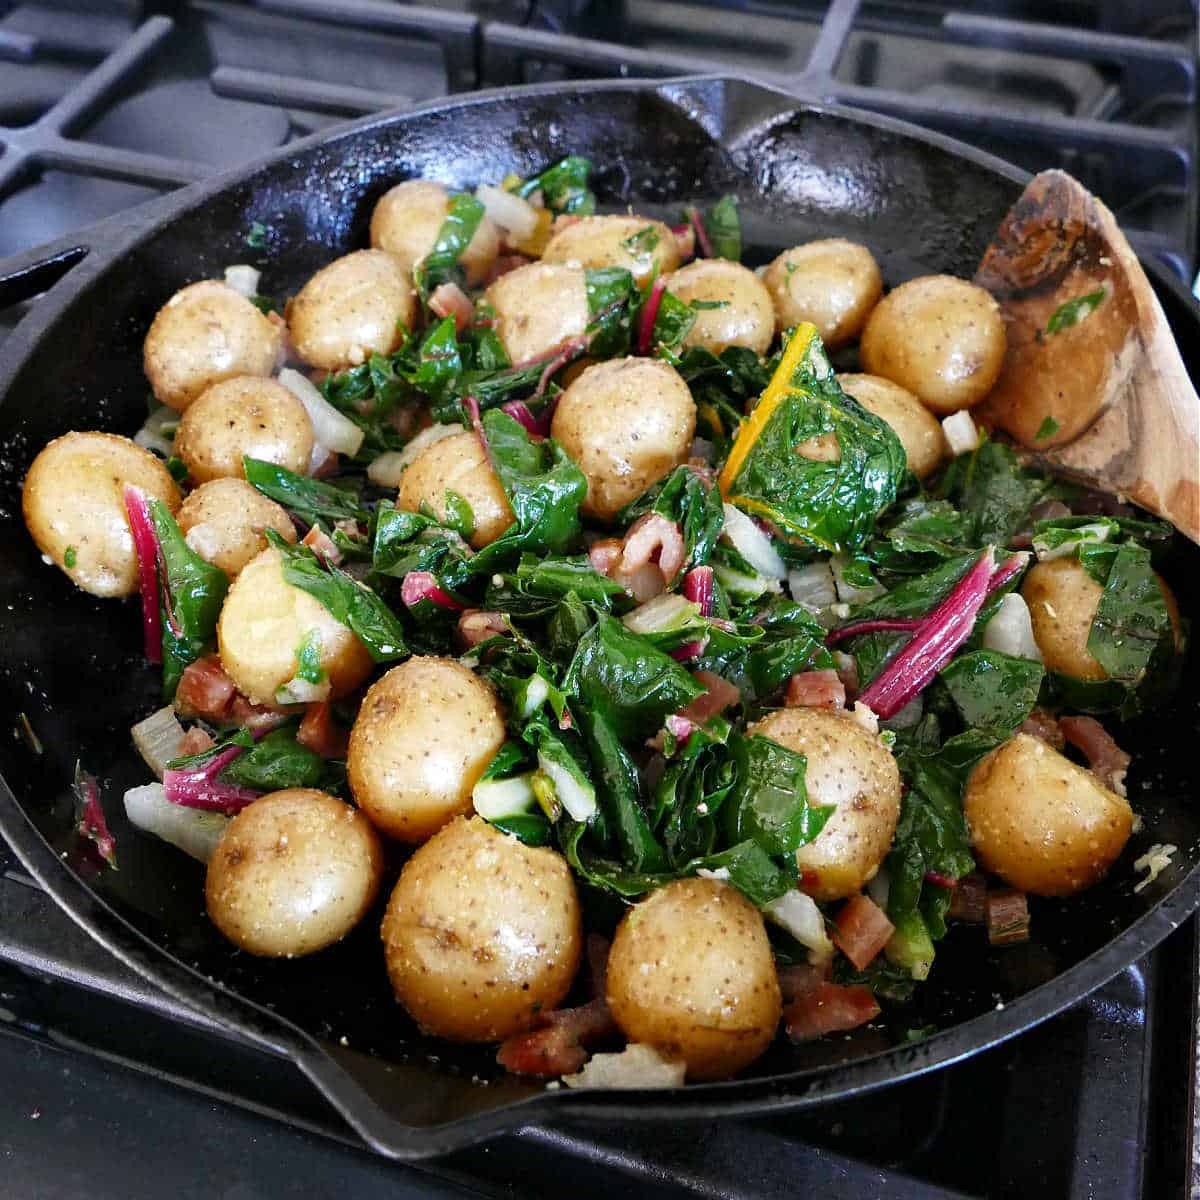 Swiss chard and potatoes cooking in olive oil and garlic in a skillet